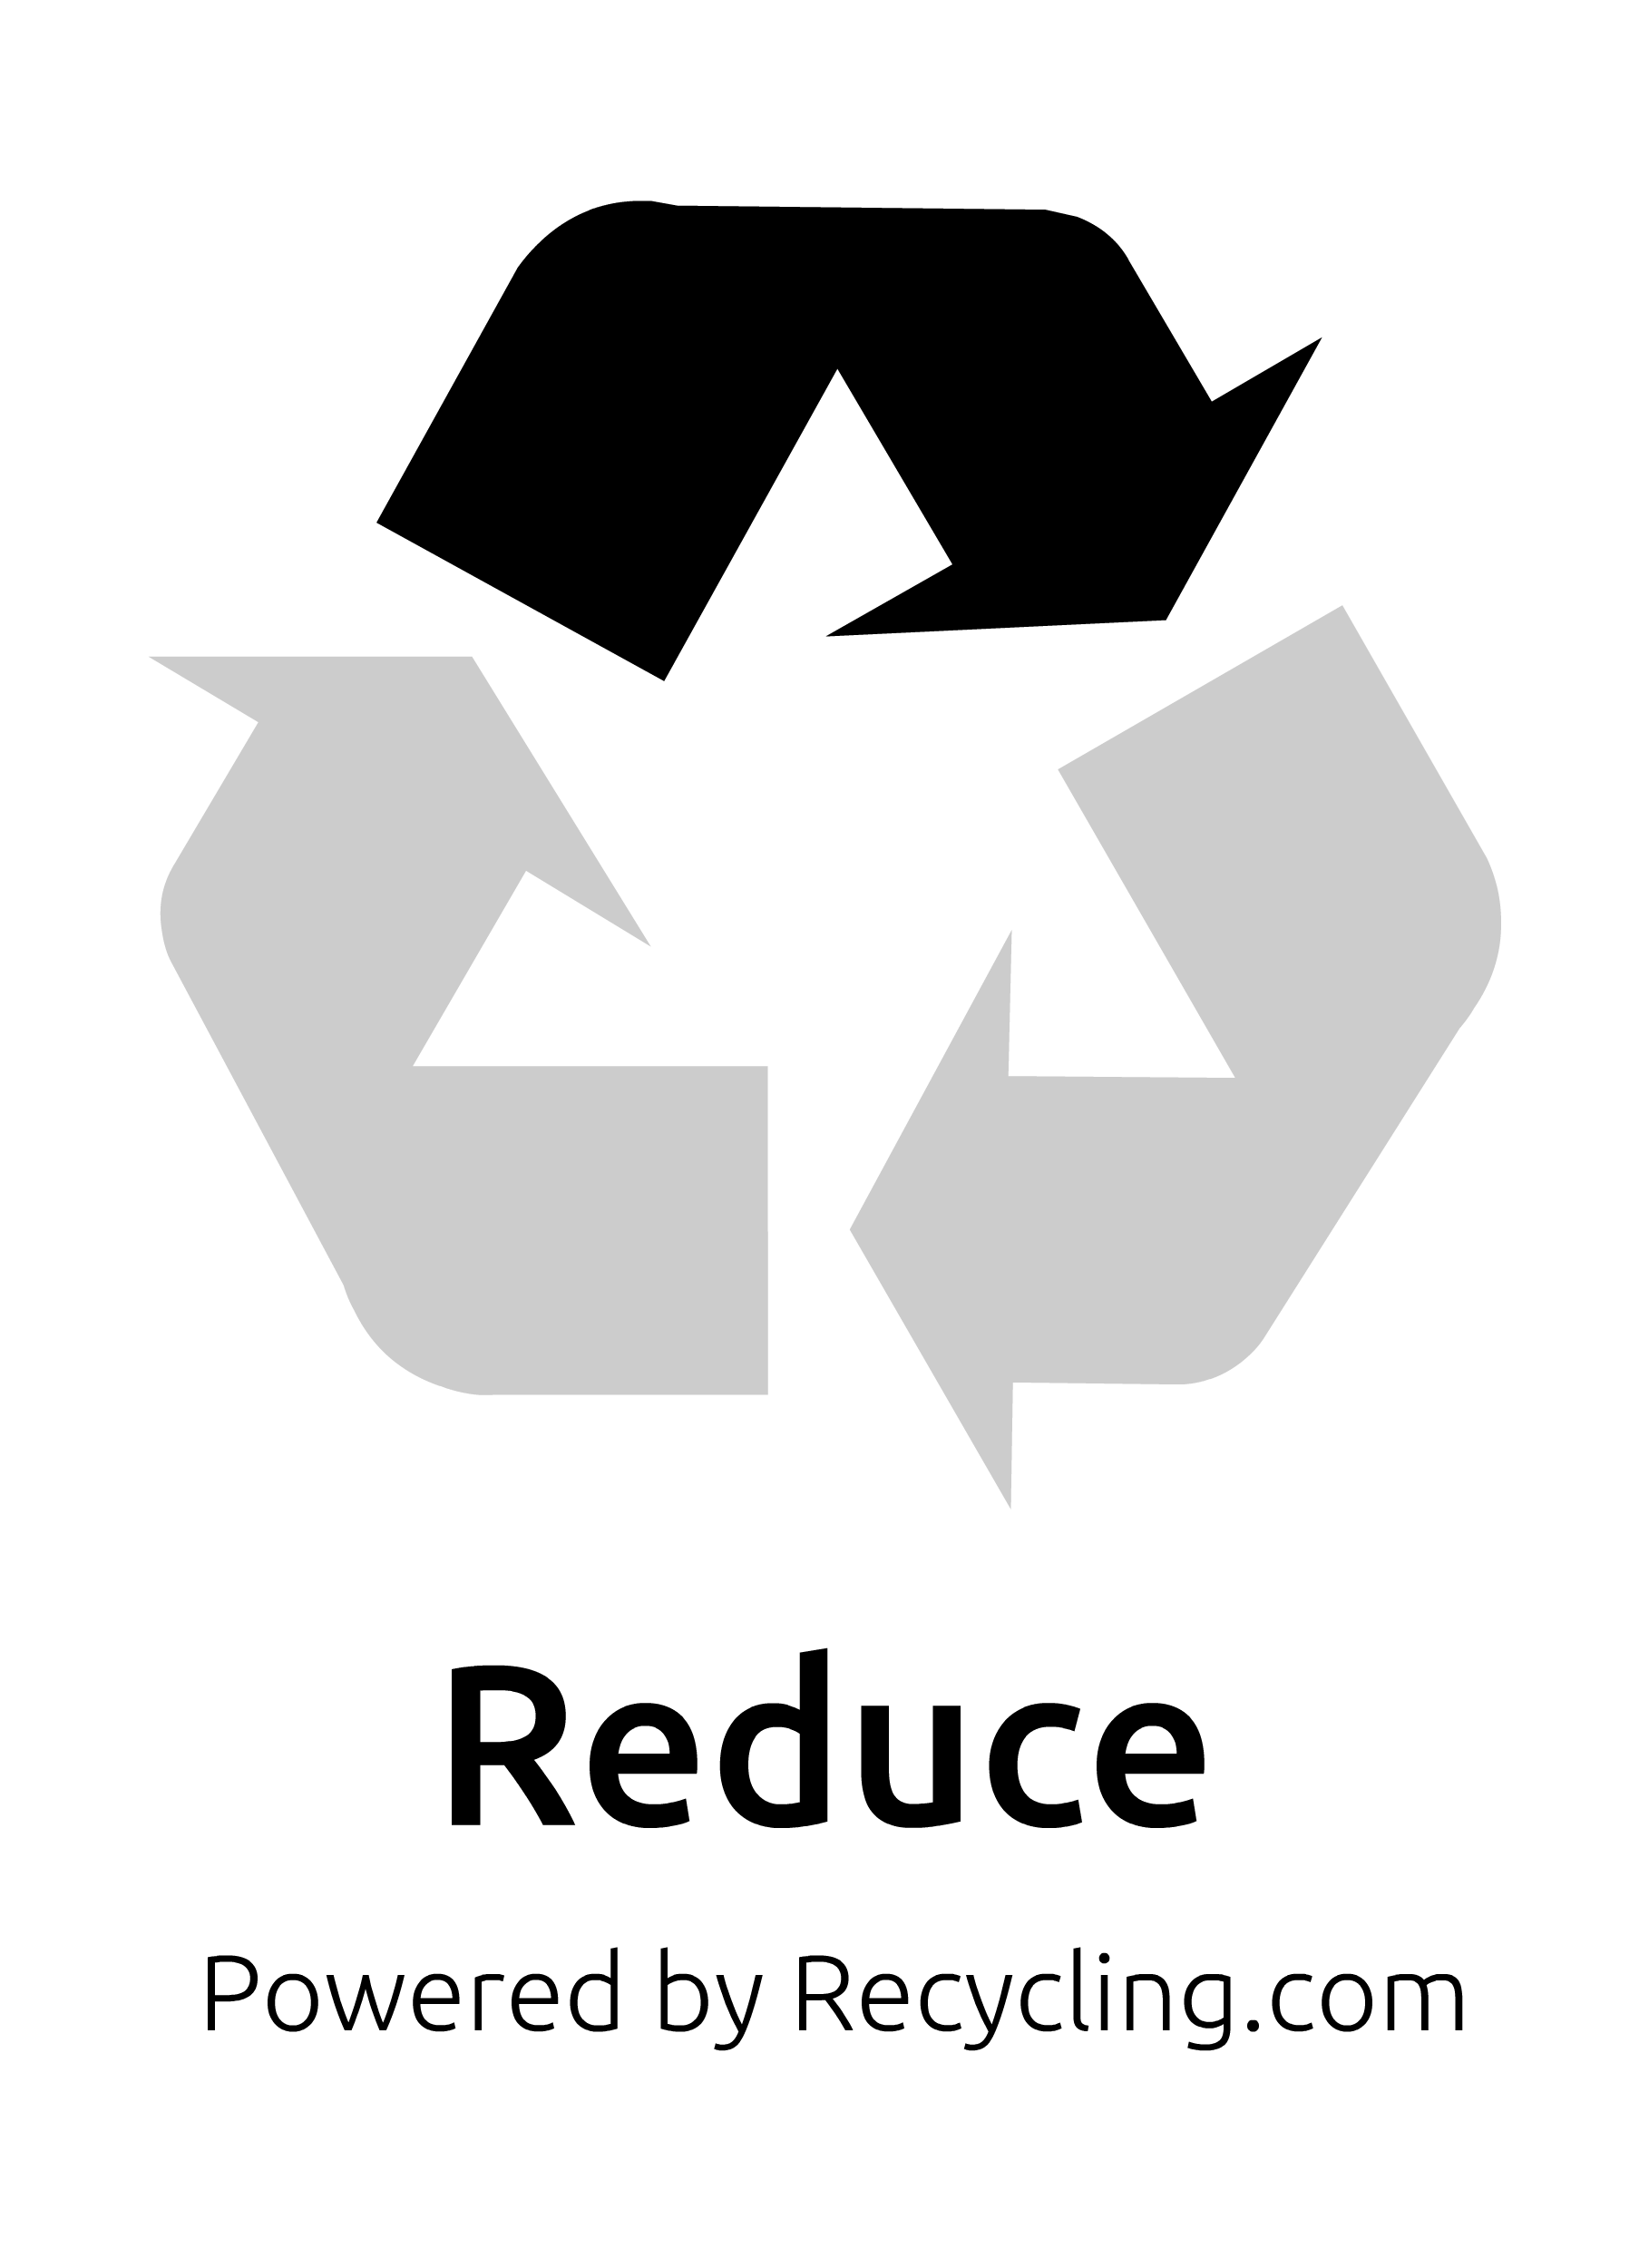 Reduce Logo - The Recycling Trilogy - Reduce, Reuse, Recycle | Download